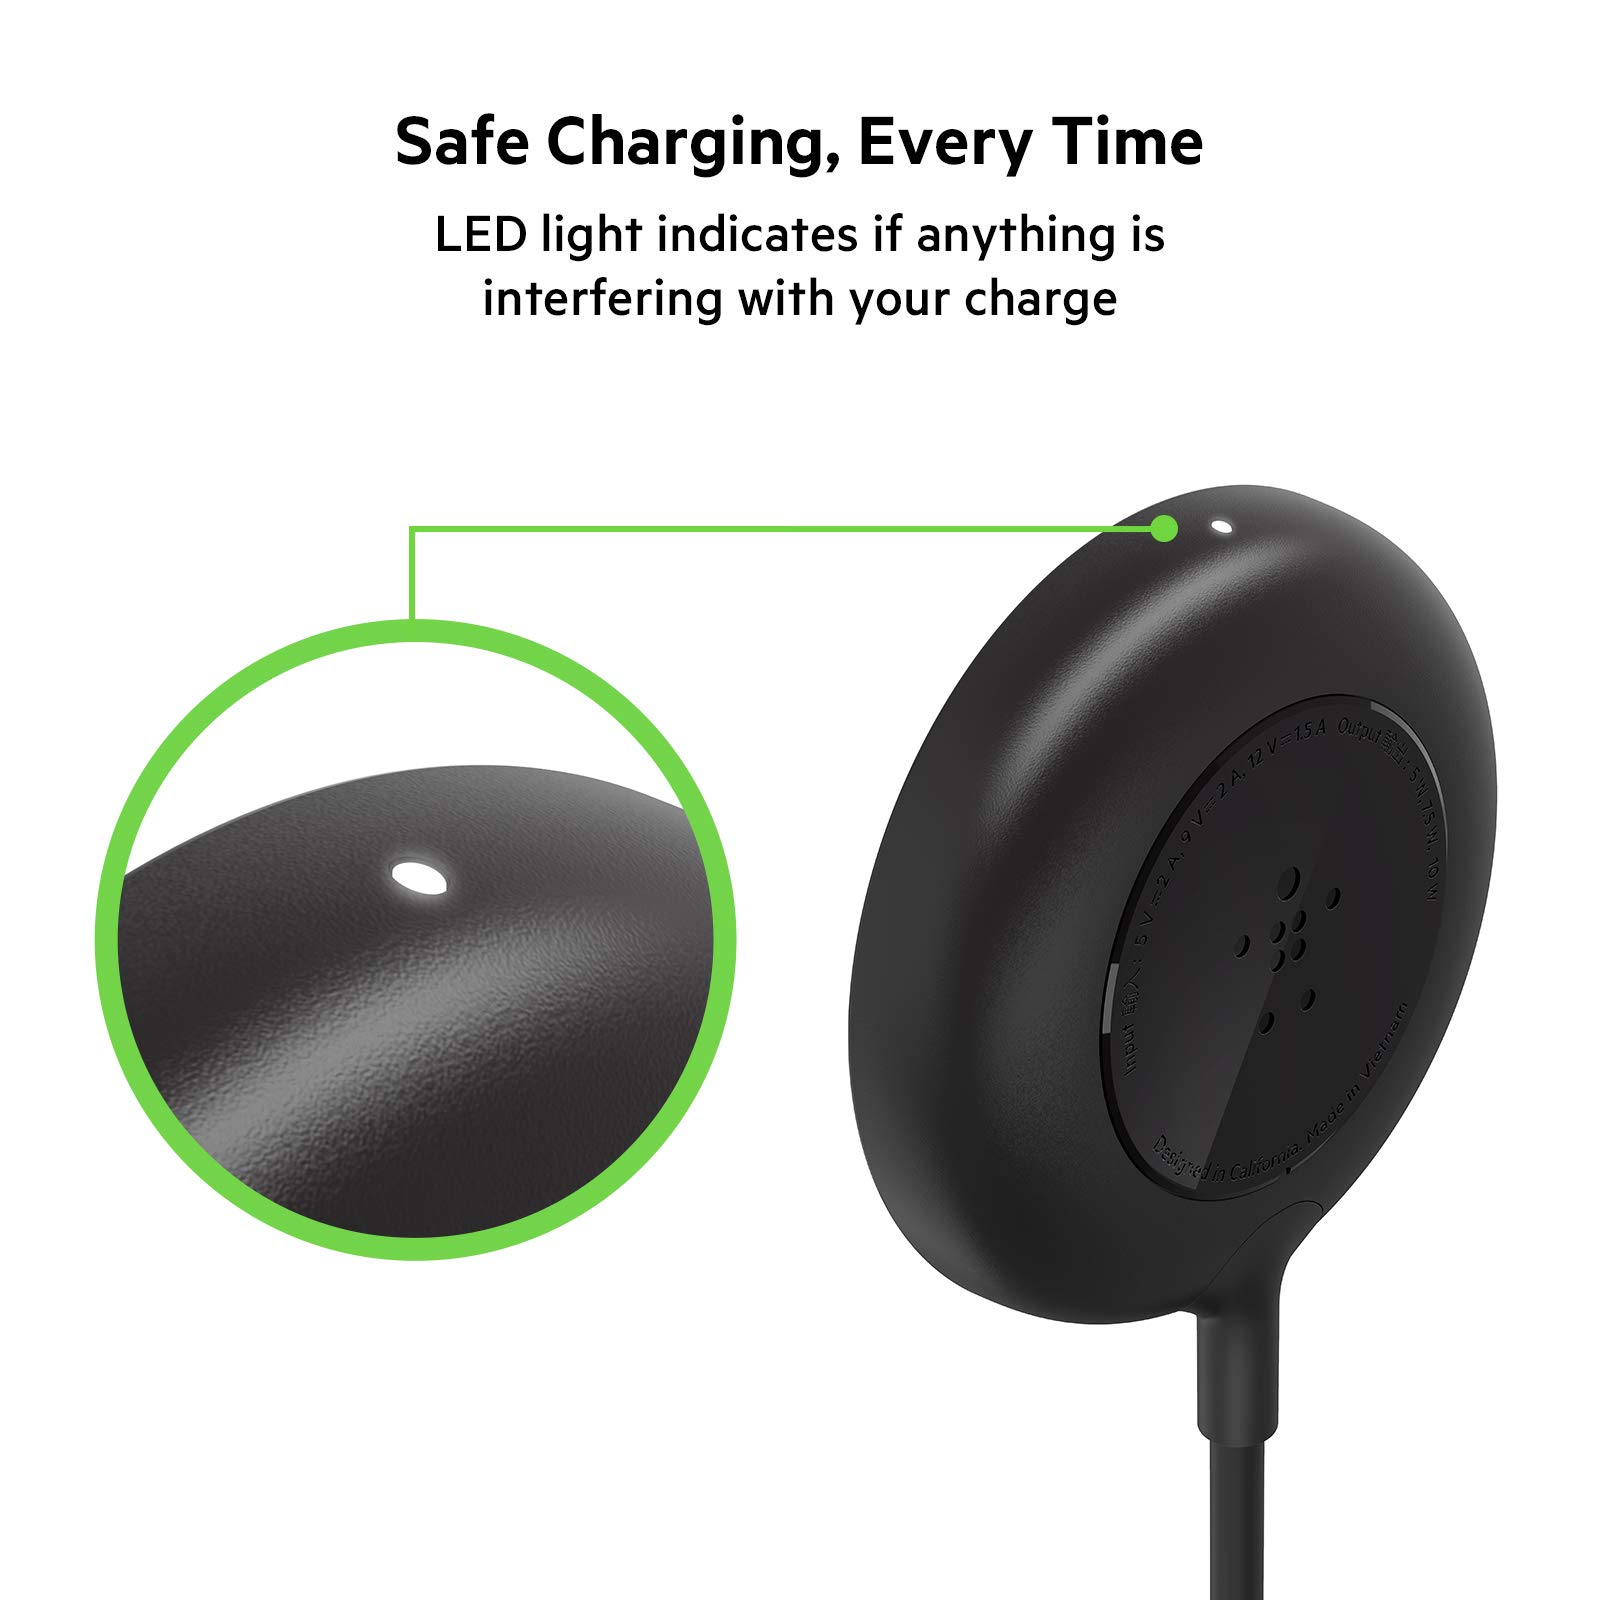 Belkin Magnetic Portable Wireless Charger Pad - 6’ (2M) Long Cable - MagSafe Charger Compatible - iPhone Charger - Works w/ iPhone 14/13 & 12 - Power Supply Included - Black (Package May Vary)